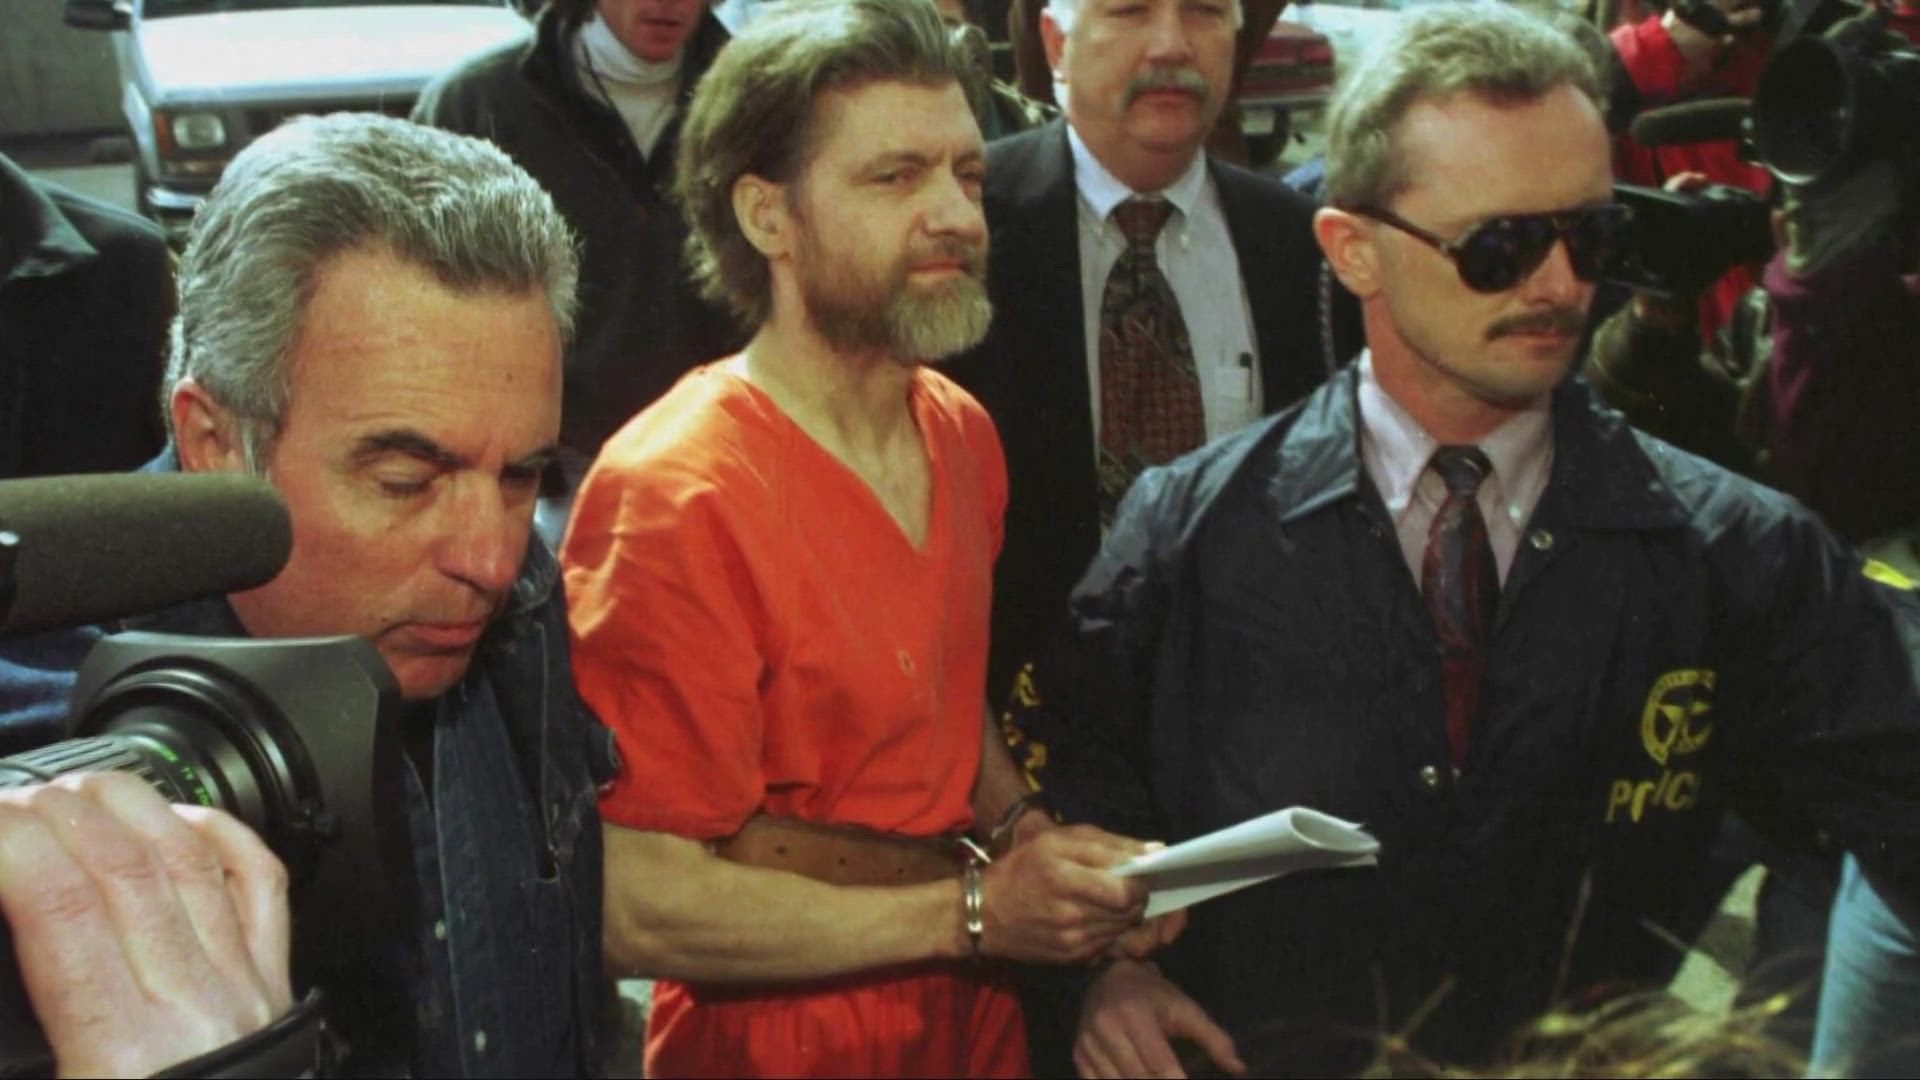 Kaczynski had been serving four life sentences in federal prison, where he had been since May 1998.